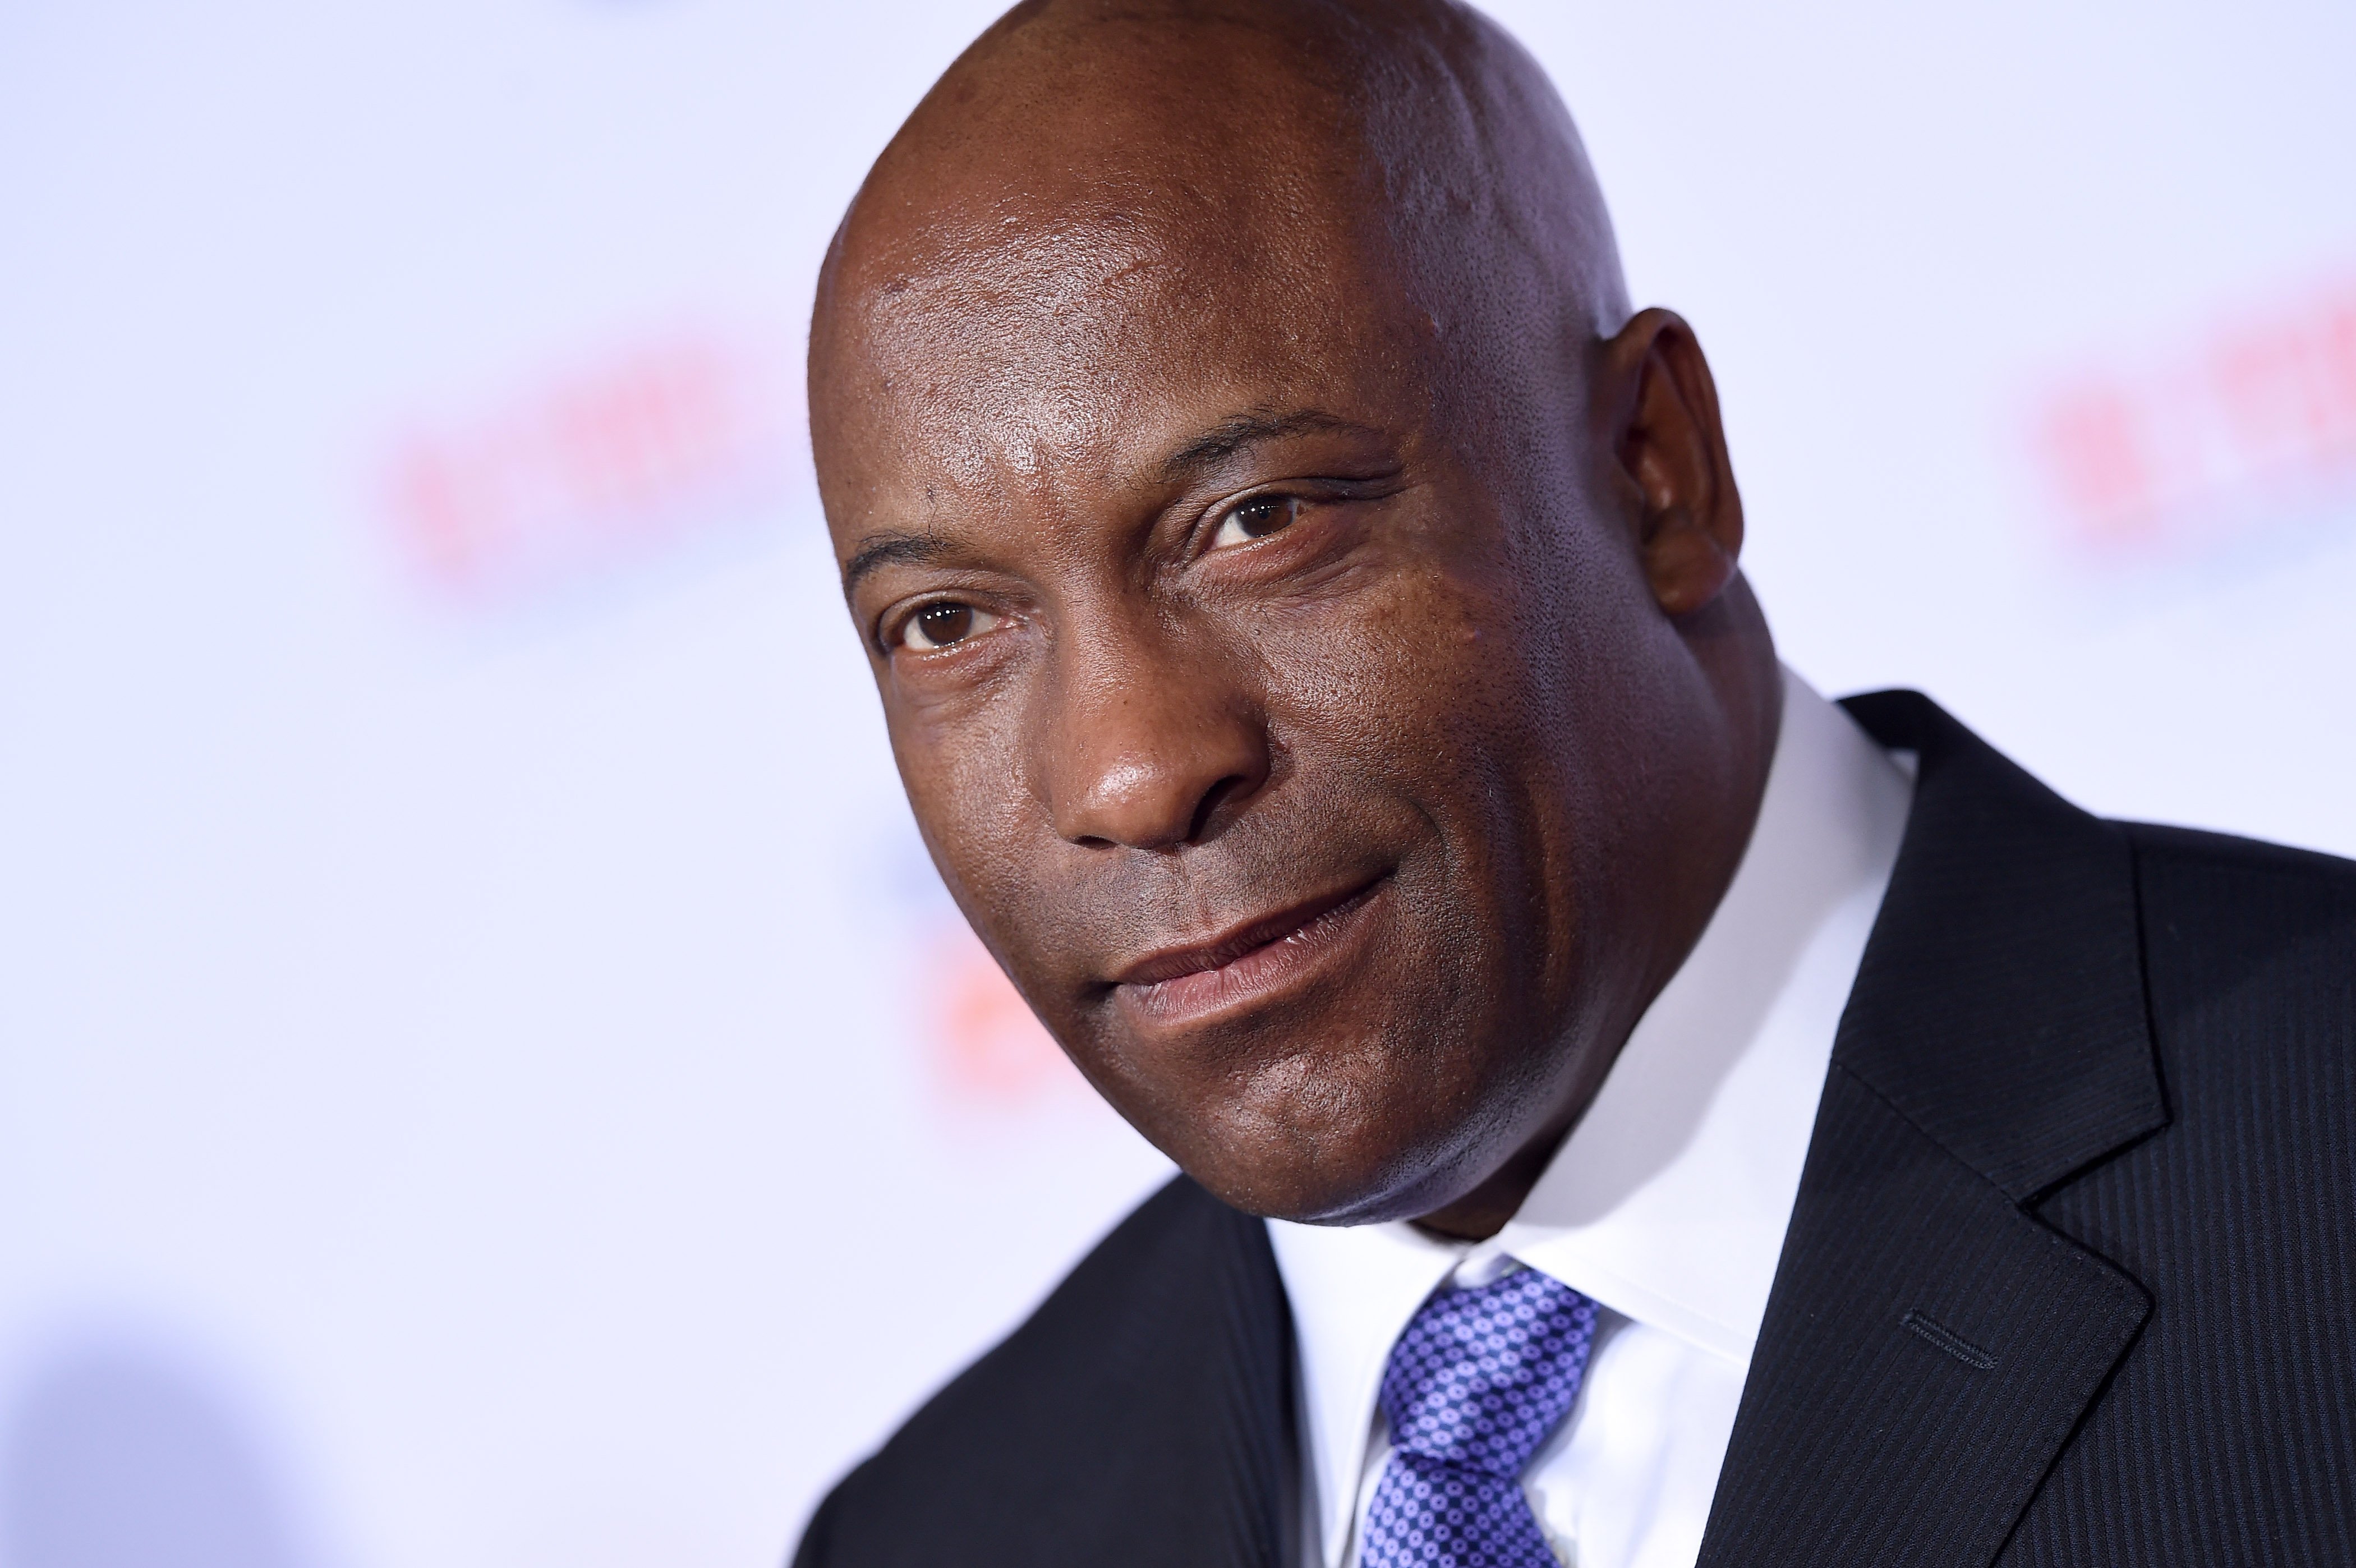 Director John Singleton arrives at the premiere of 'FX's 'American Crime Story - The People V. O.J. Simpson' at Westwood Village Theatre on January 27, 2016 | Photo: Getty Images